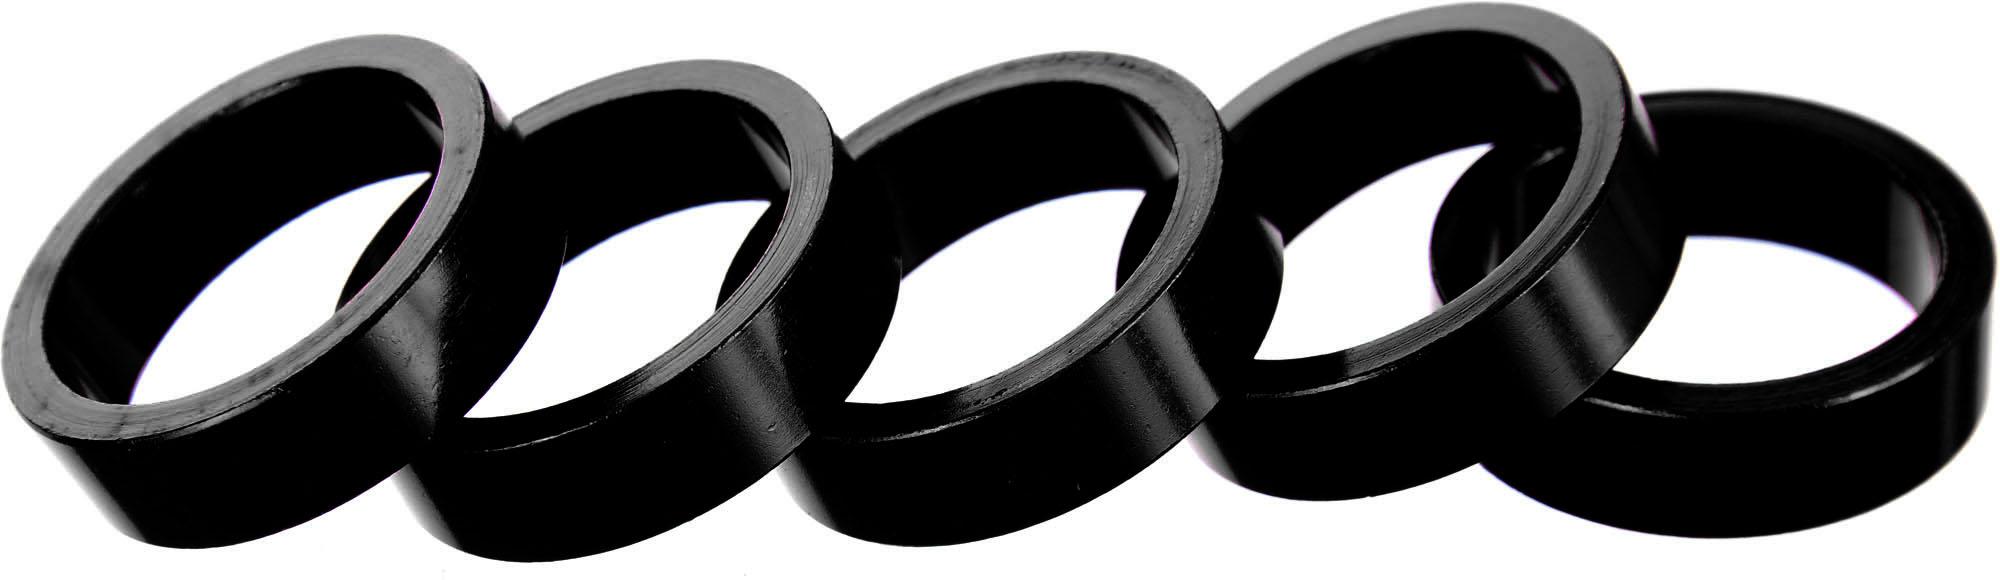 Brand-x Spacer Pack Alloy 5 X 10mm - Black